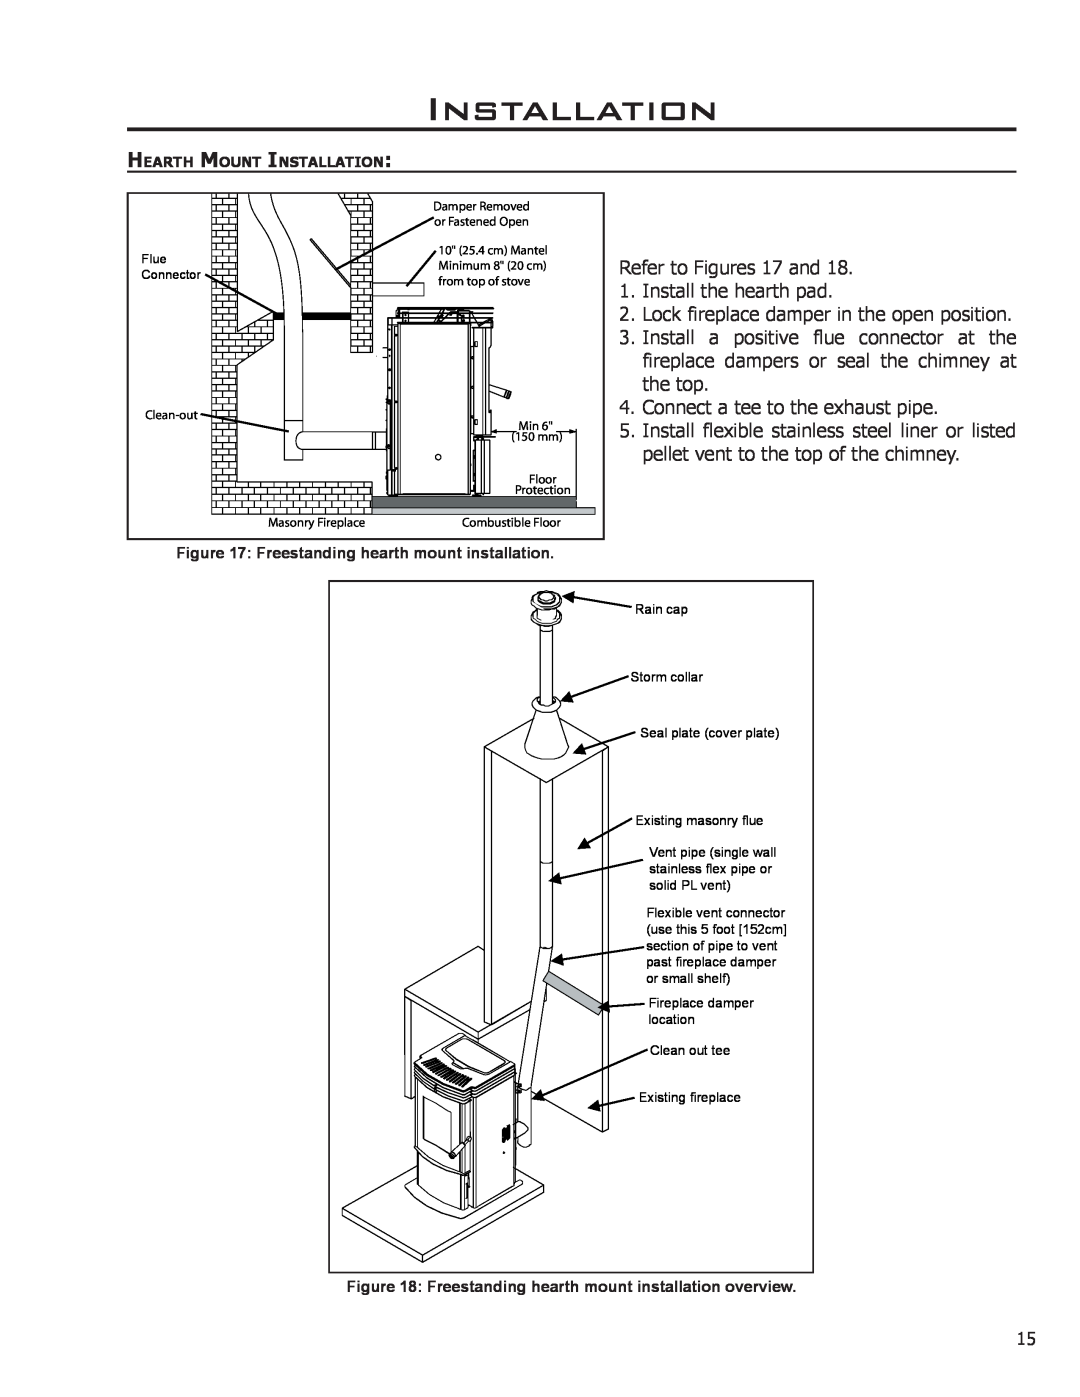 Enviro C-11150 technical manual Installation, Refer to Figures 17 and 